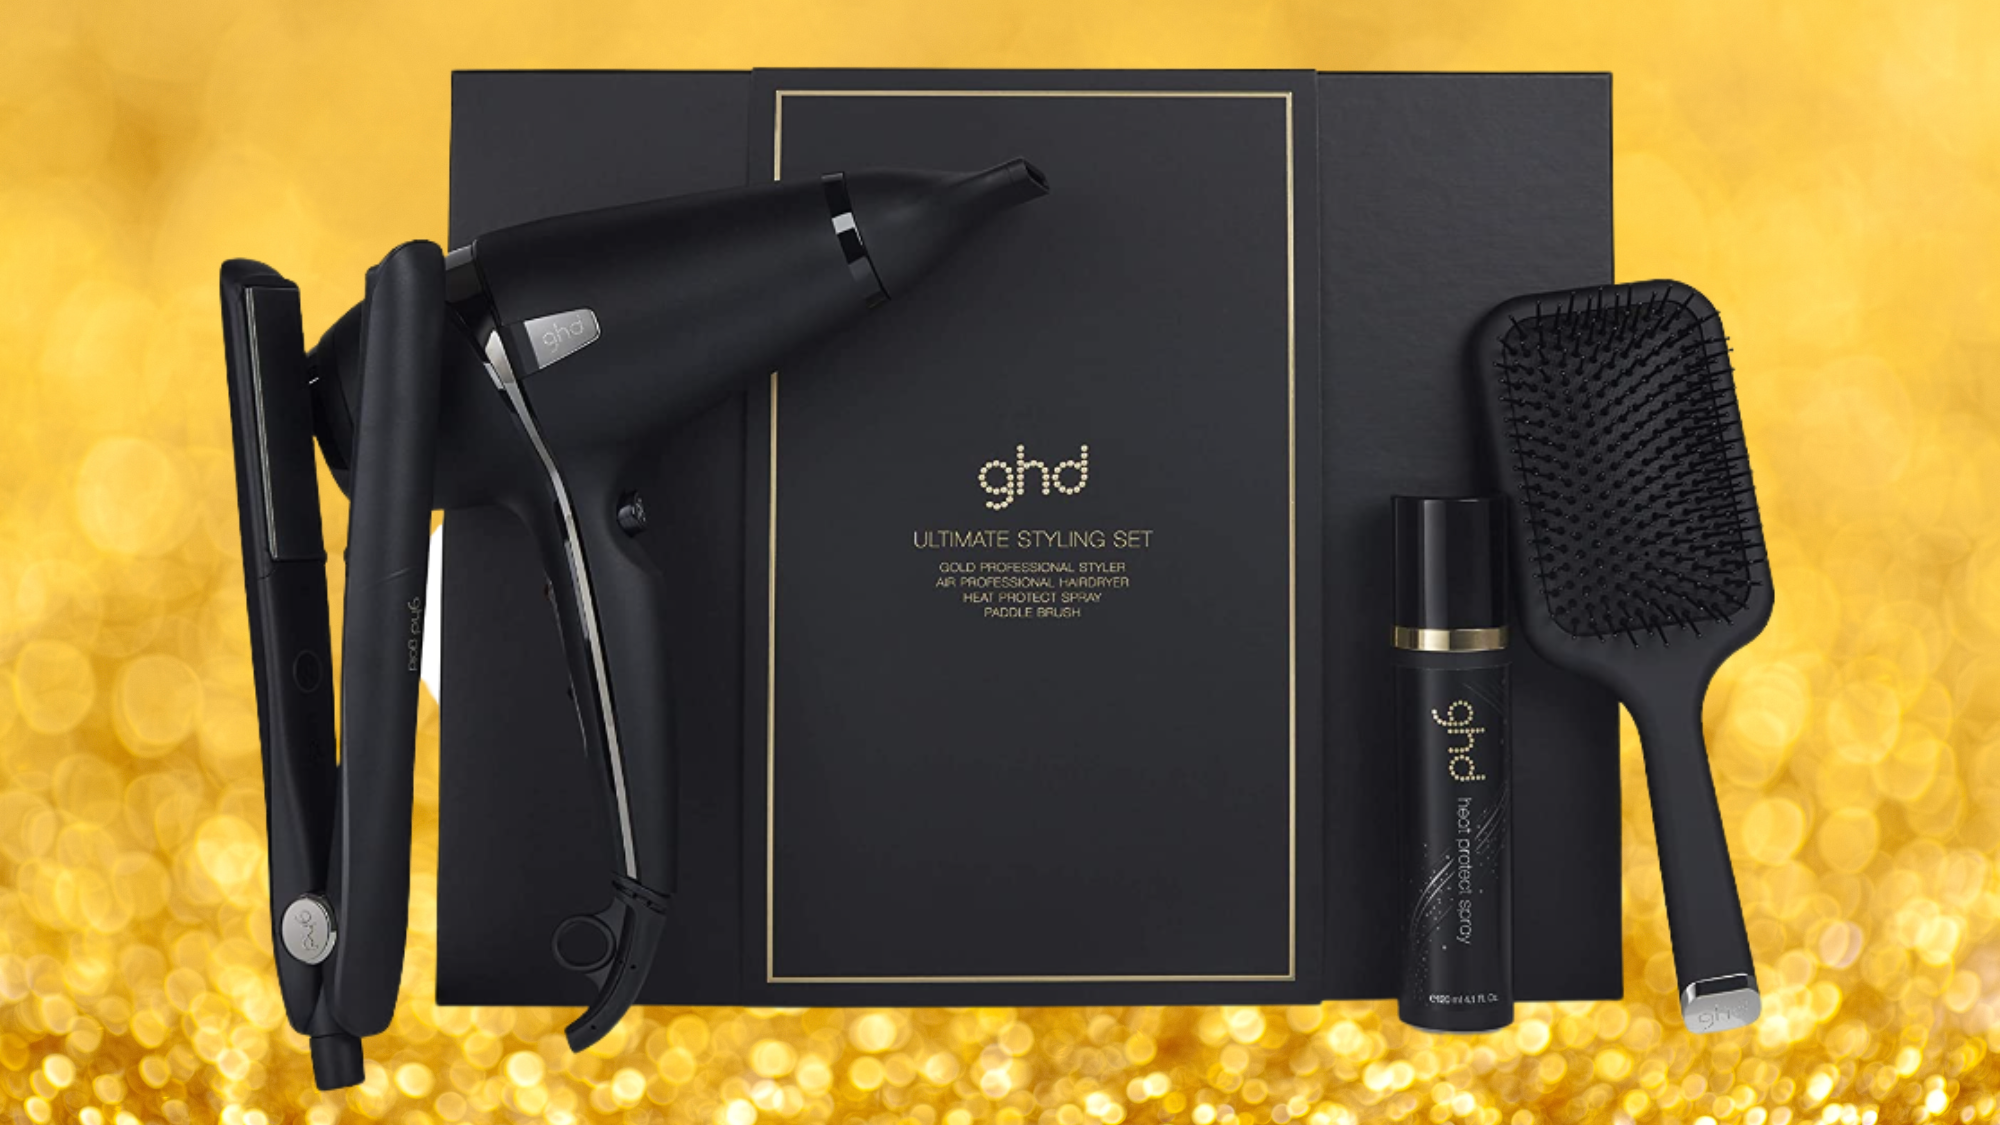 You can save £80 on a ghd hair dryer and straighteners set this Prime Day |  Marie Claire UK